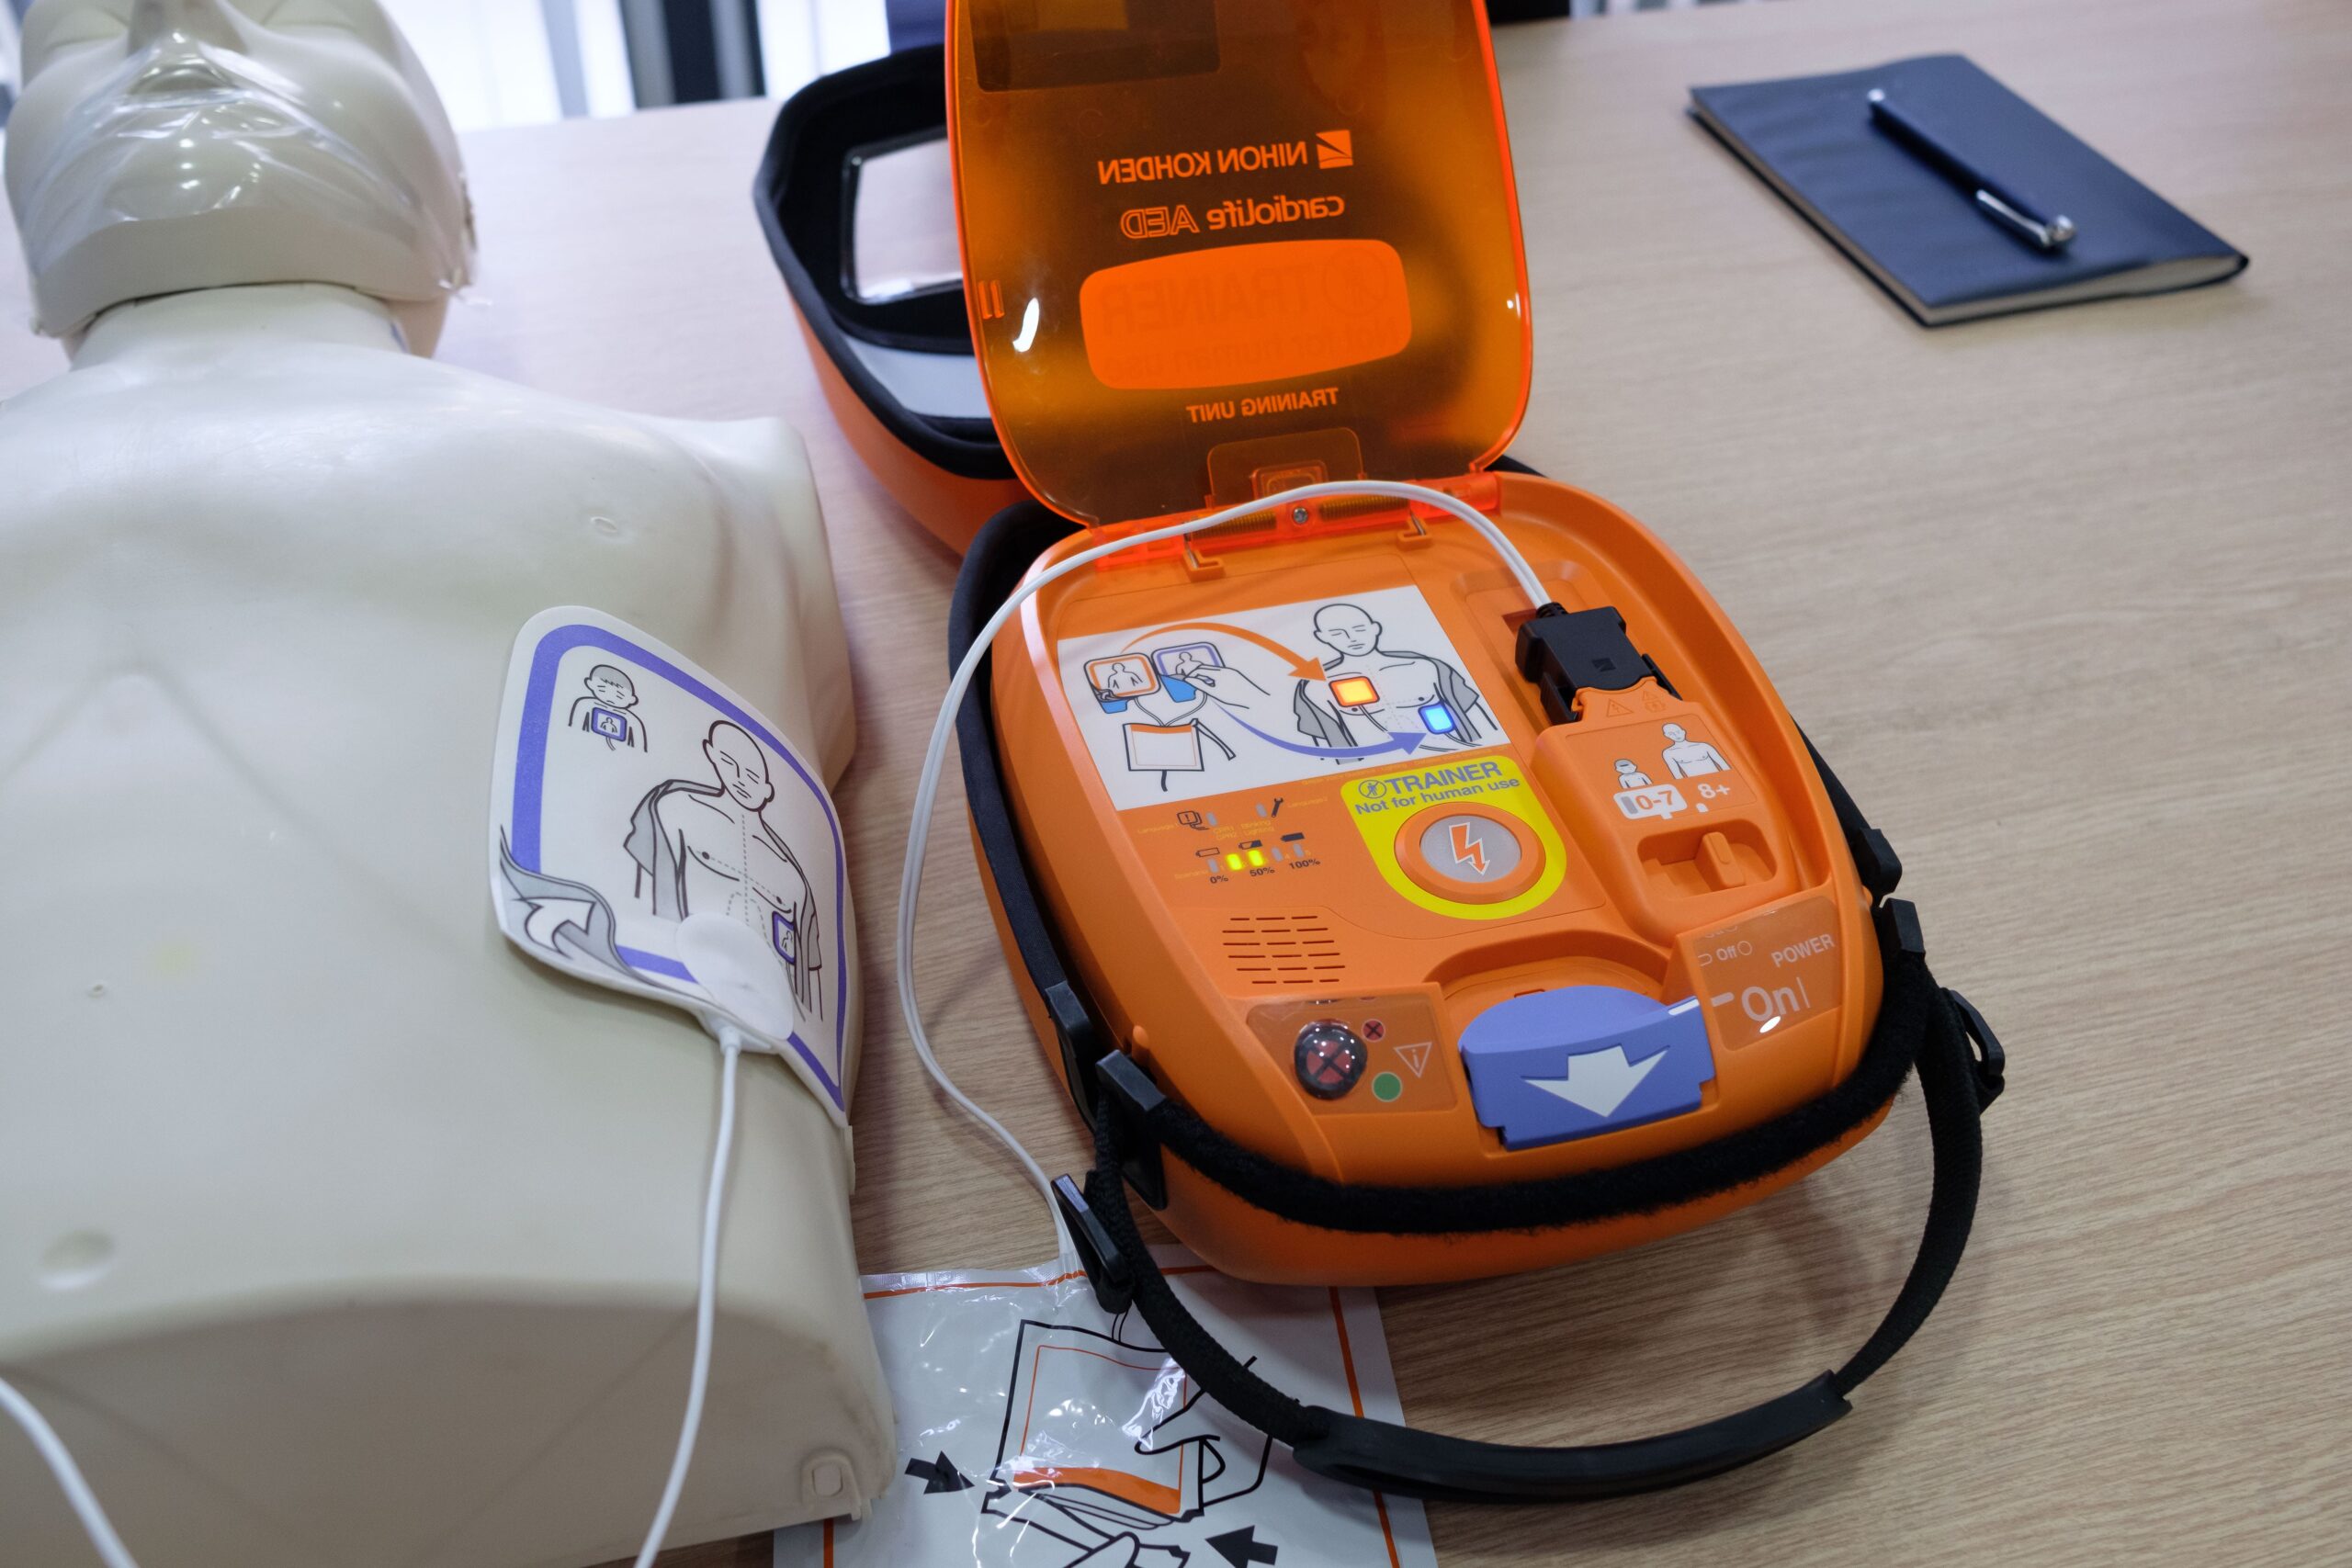 【An AED is used to correct from sudden cardiac arrest】What is the effect of AED (Automated External Defibrillator)? Introducing merits based on emergency cases.